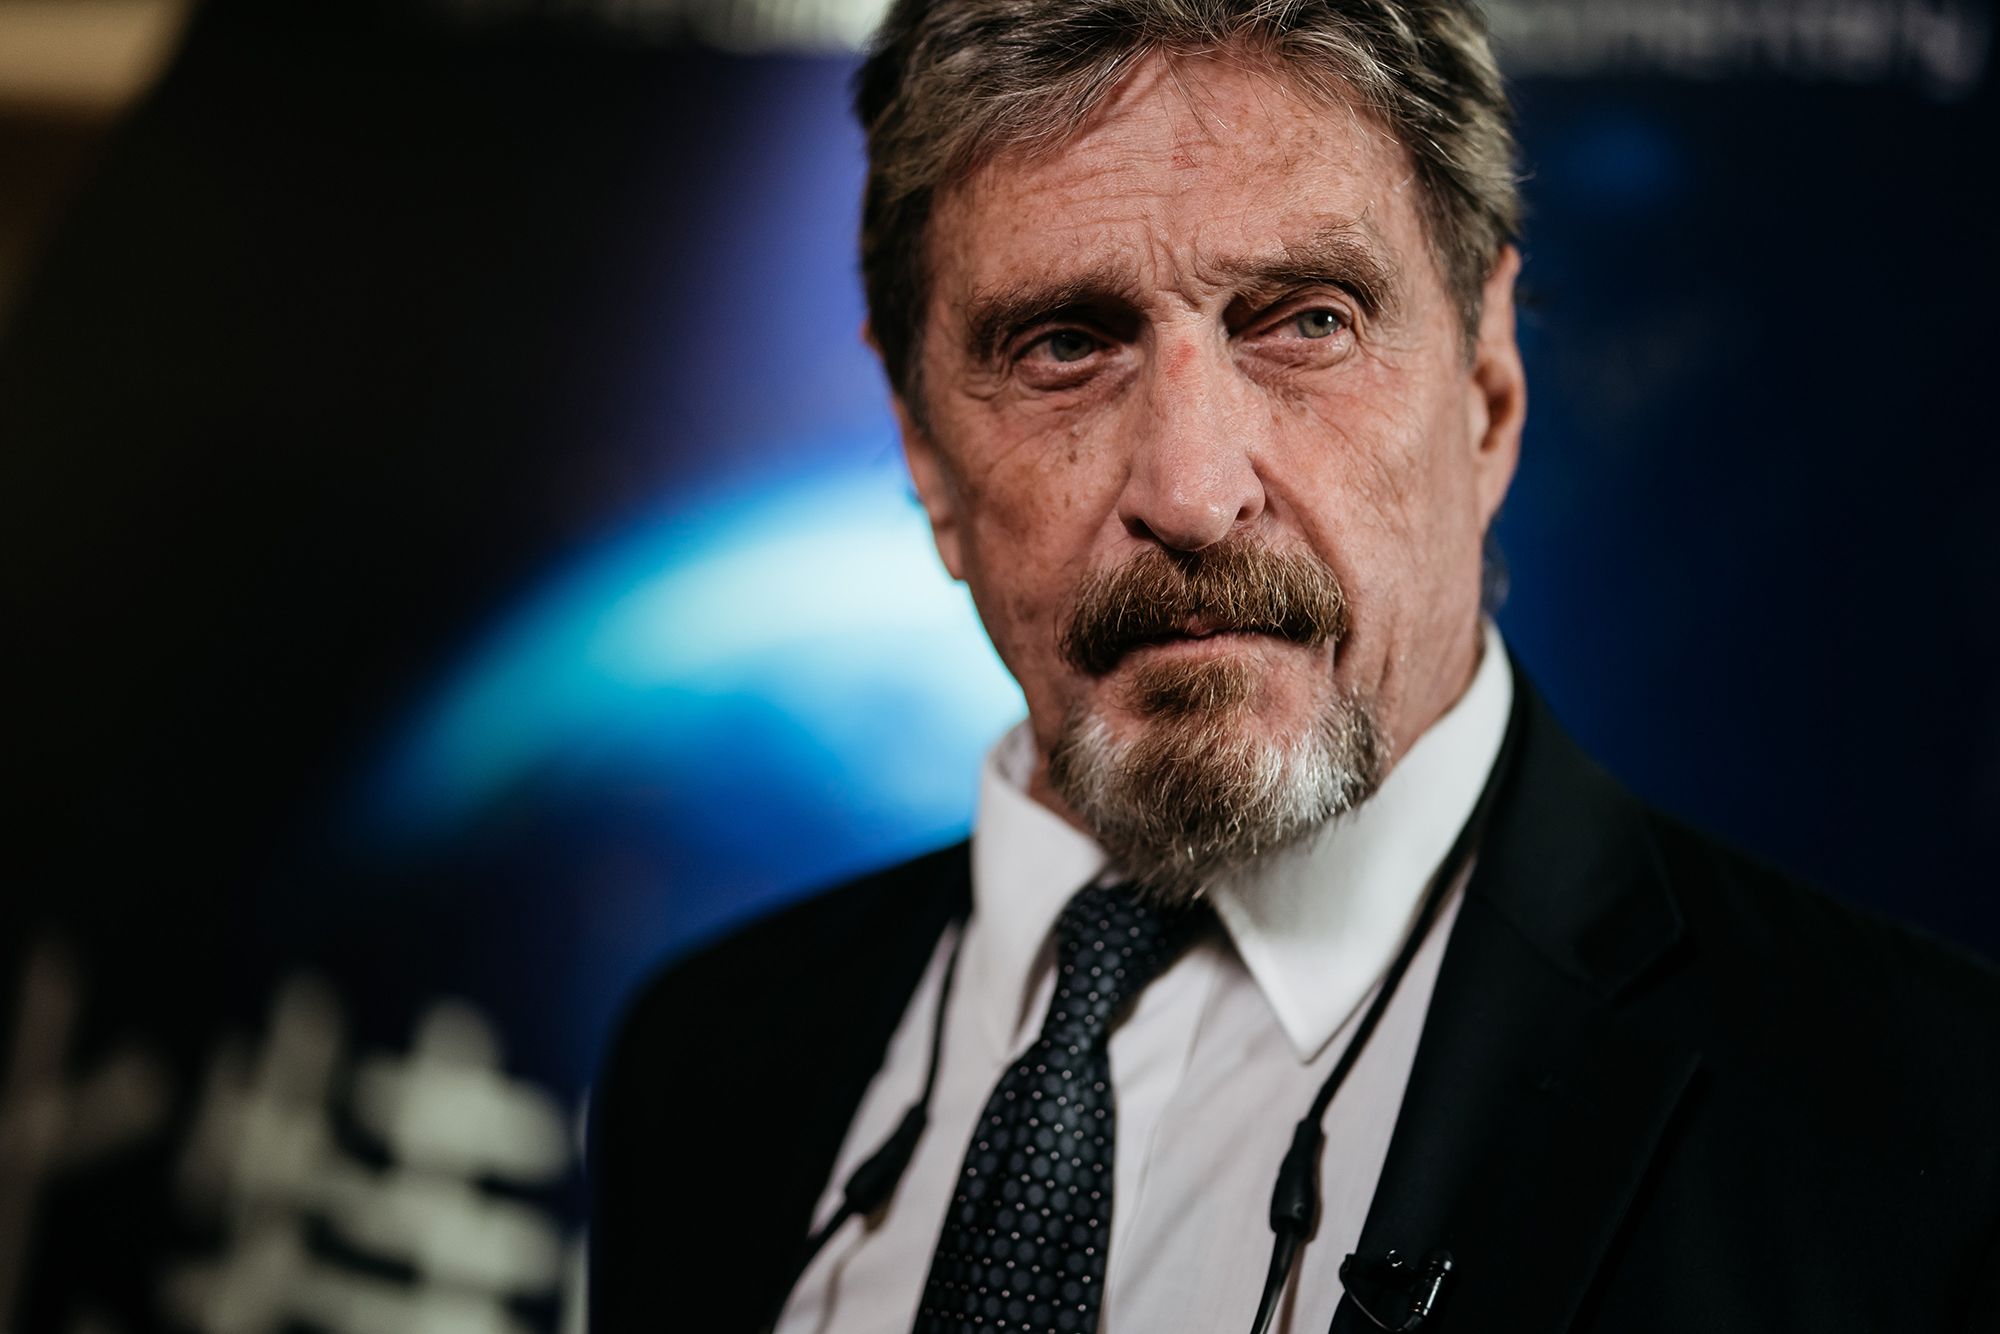 McAfee: Bitcoin will reach $1 million in | Information Age | ACS